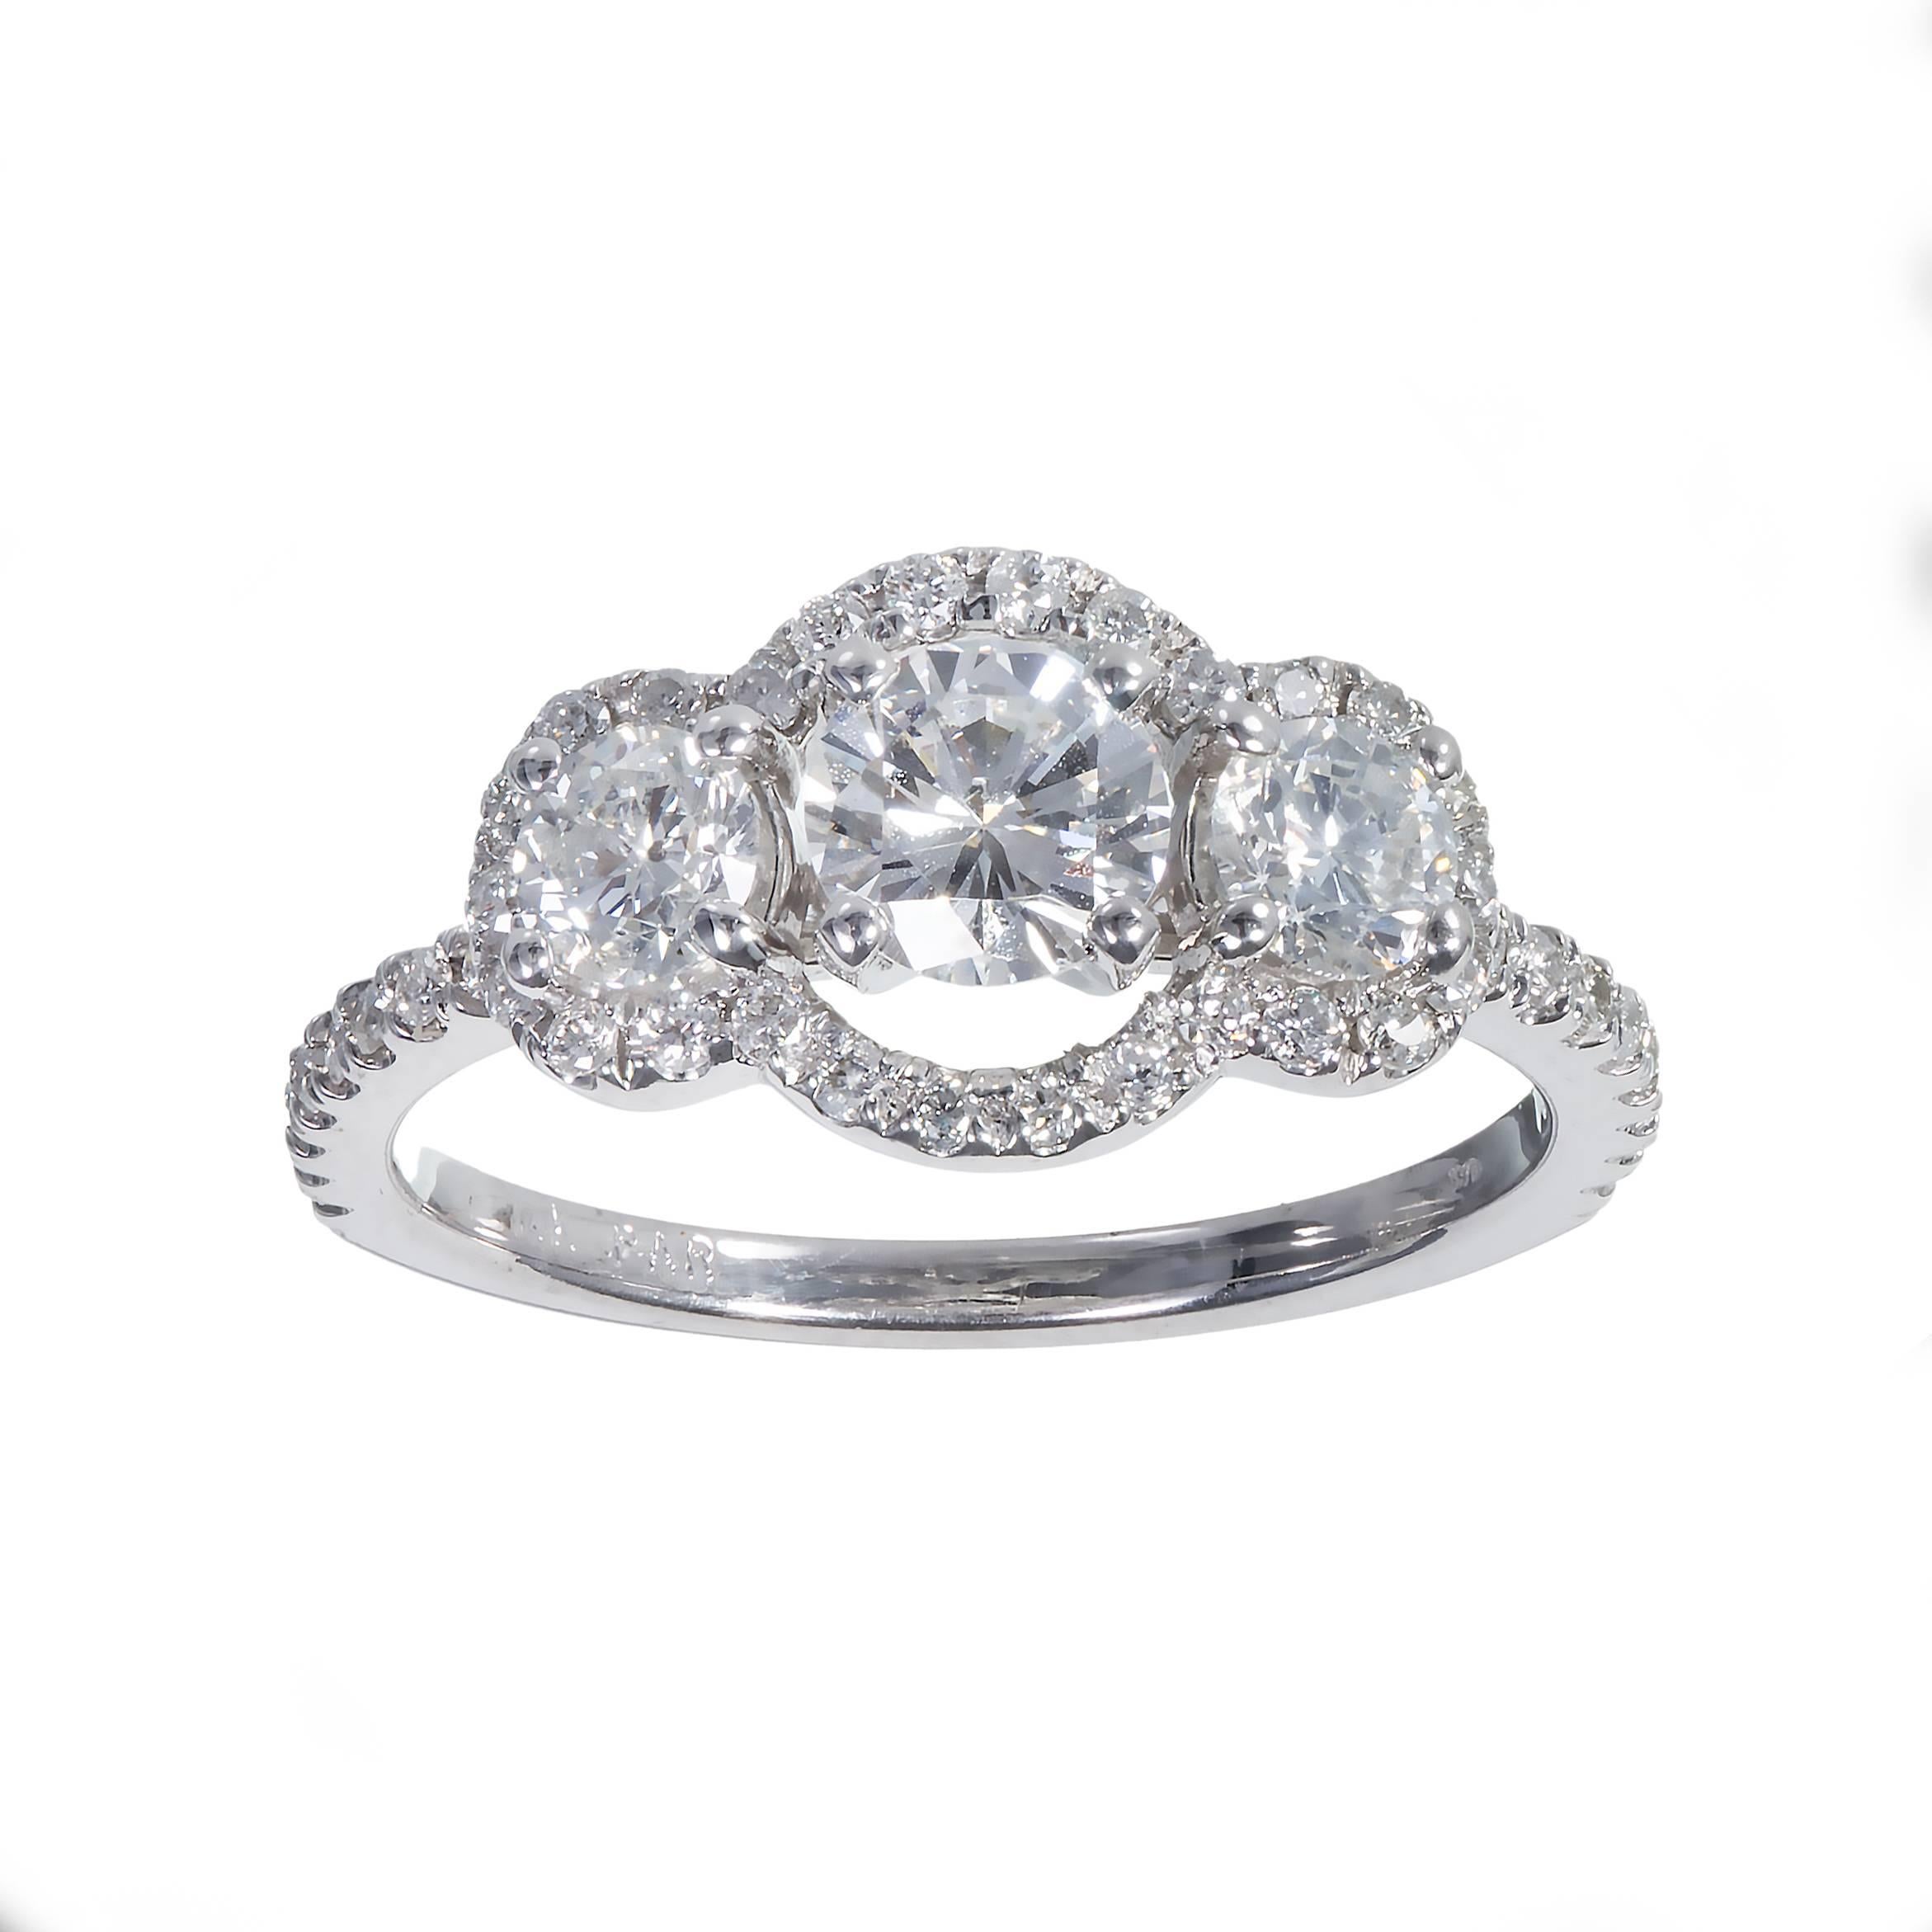 Three stone diamond halo 14k white gold engagement ring. Designed so a band will sit flush against it. EGL certified

1 round diamond E-F VS2 approximately .52 carats EGL Certificate # US313766801D
2 round brilliant cut diamonds F-G SI approximately